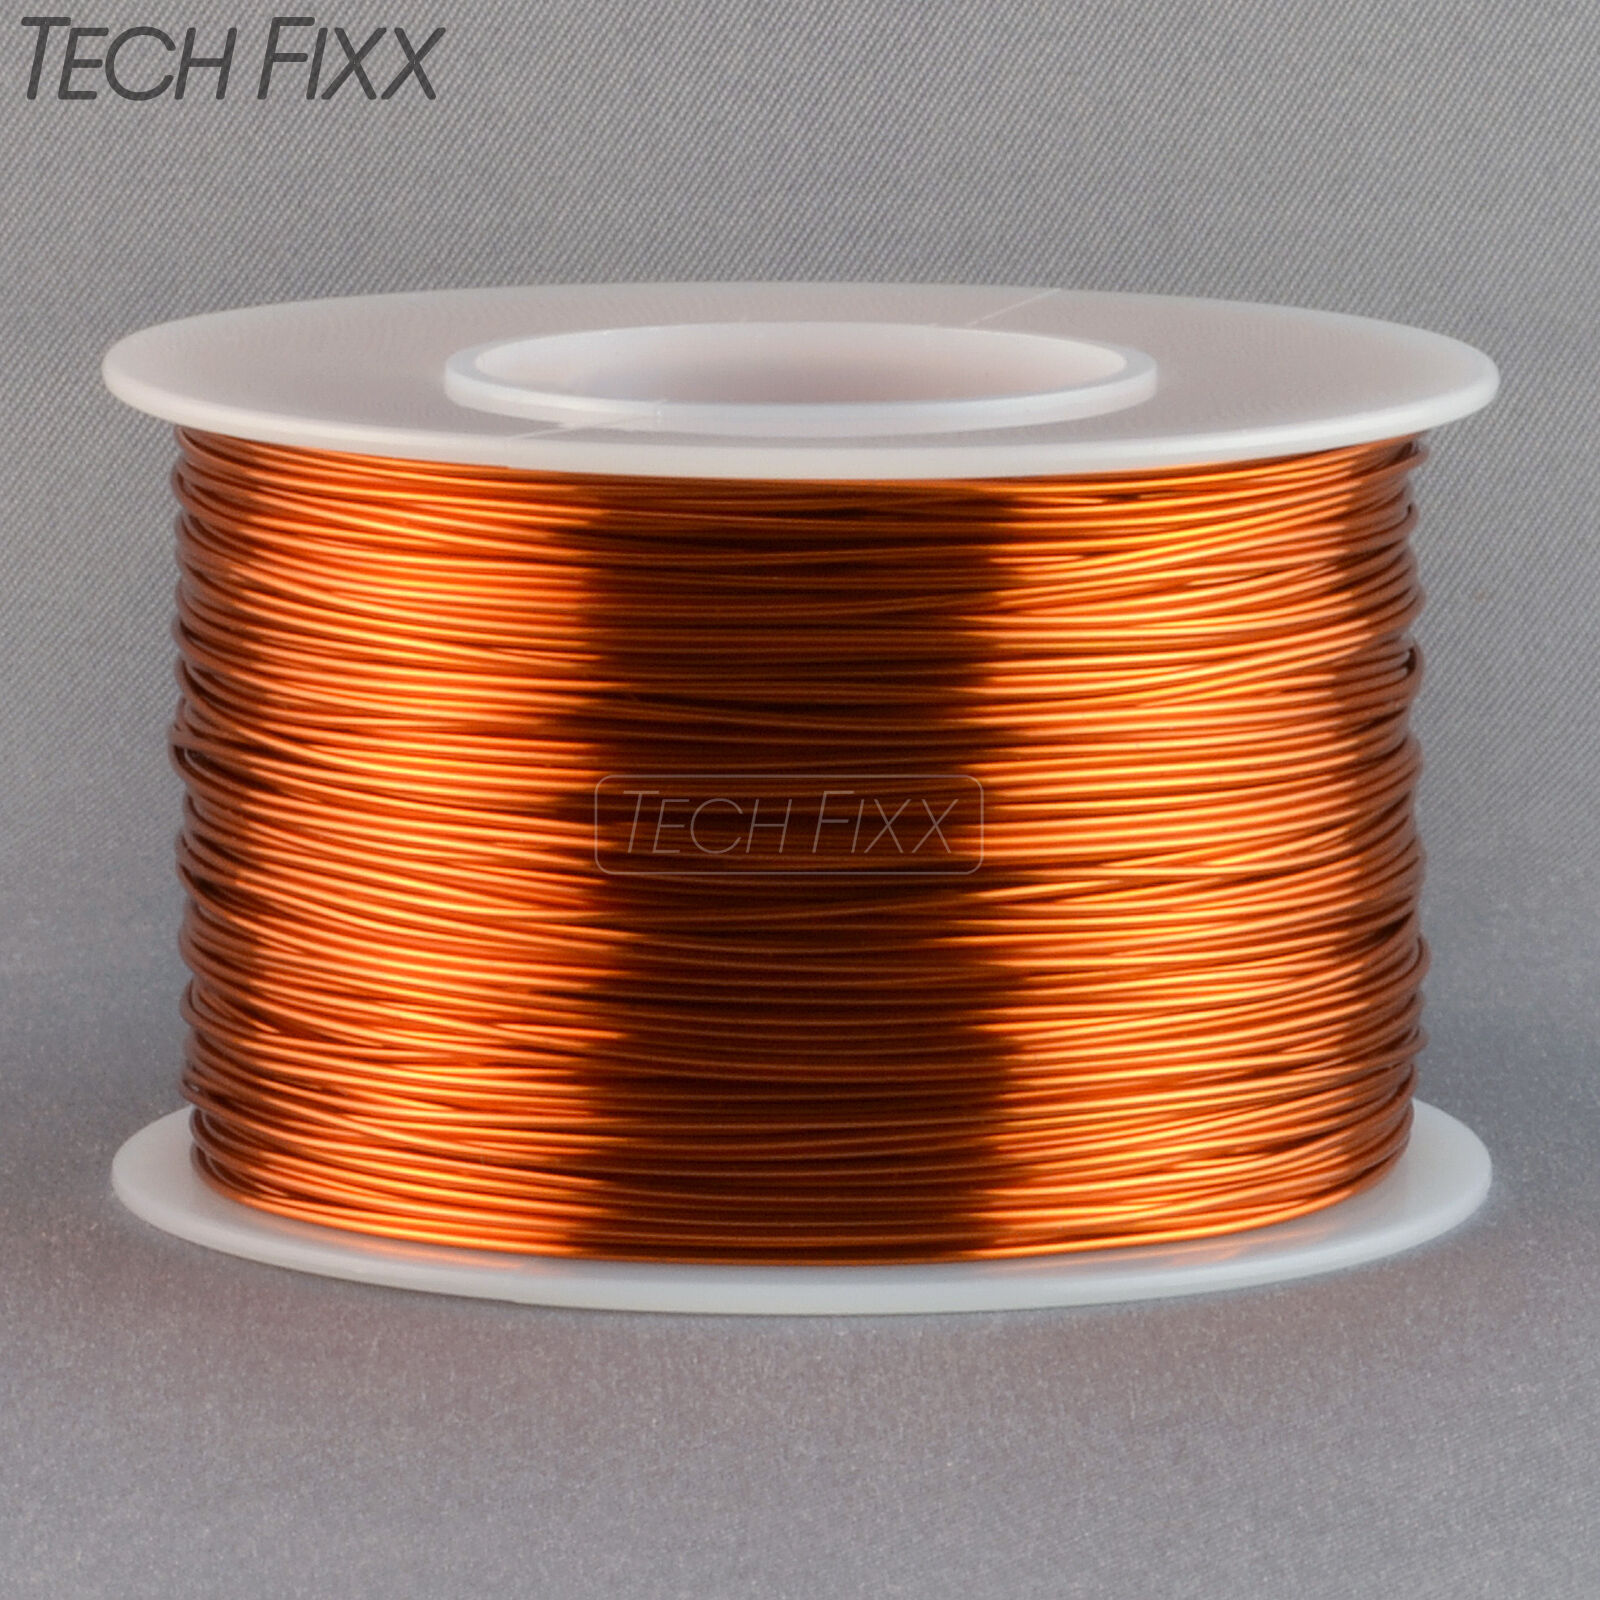 Magnet Wire 22 Gauge AWG Enameled Copper 190 Feet Coil Winding and Crafts 200C